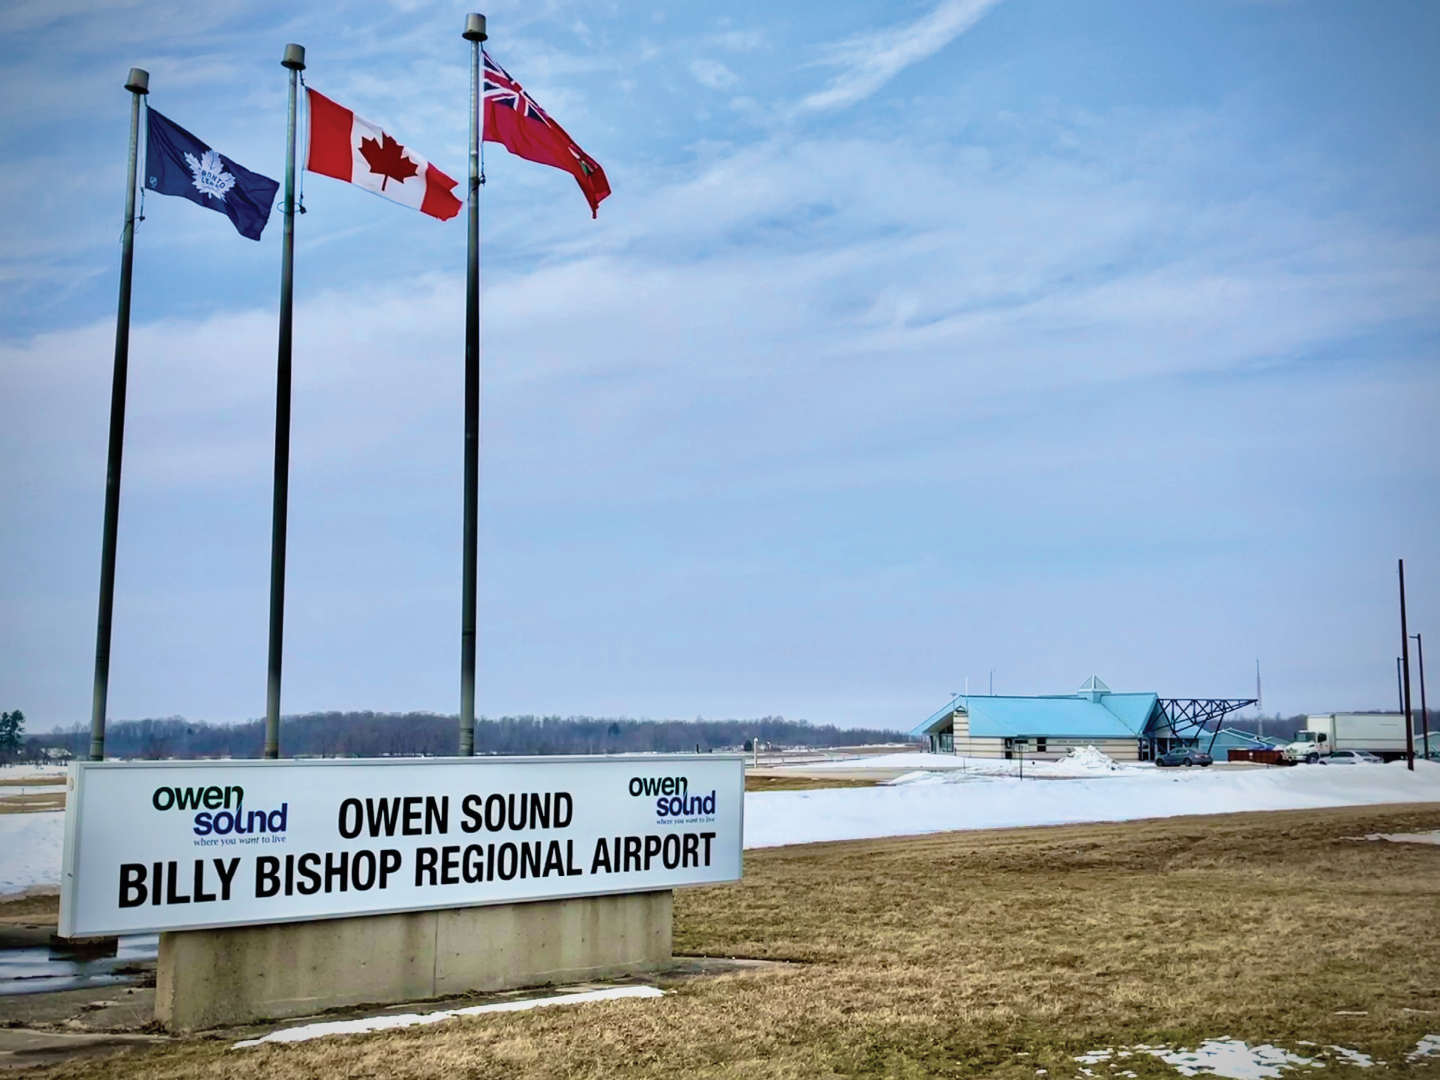 Owen Sound Airport sign and flags